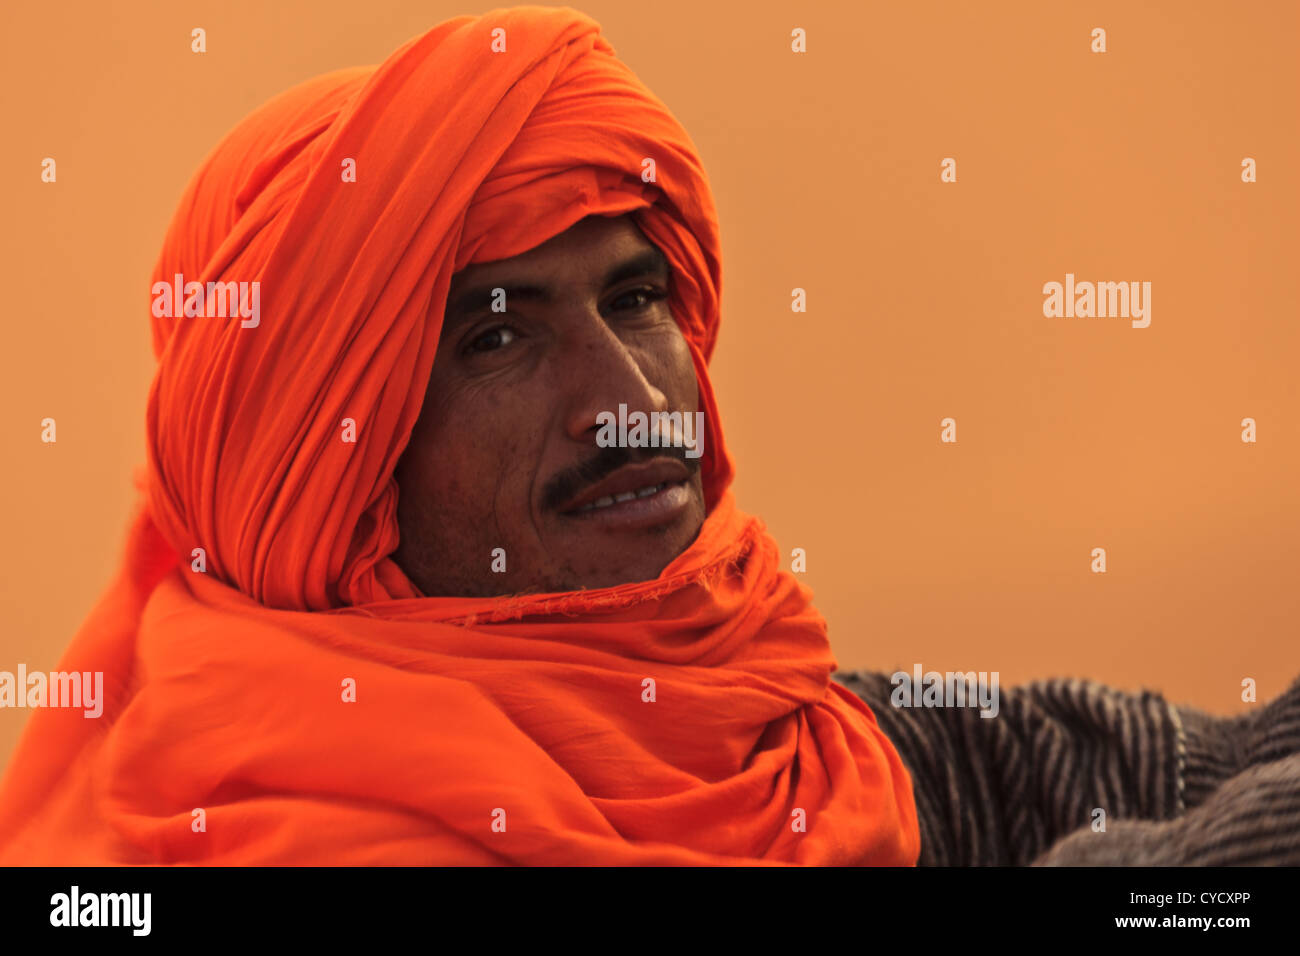 Portrait of Berber man in the Sahara with orange turban head garb blowing in the wind in Merzouga, Morocco. Stock Photo